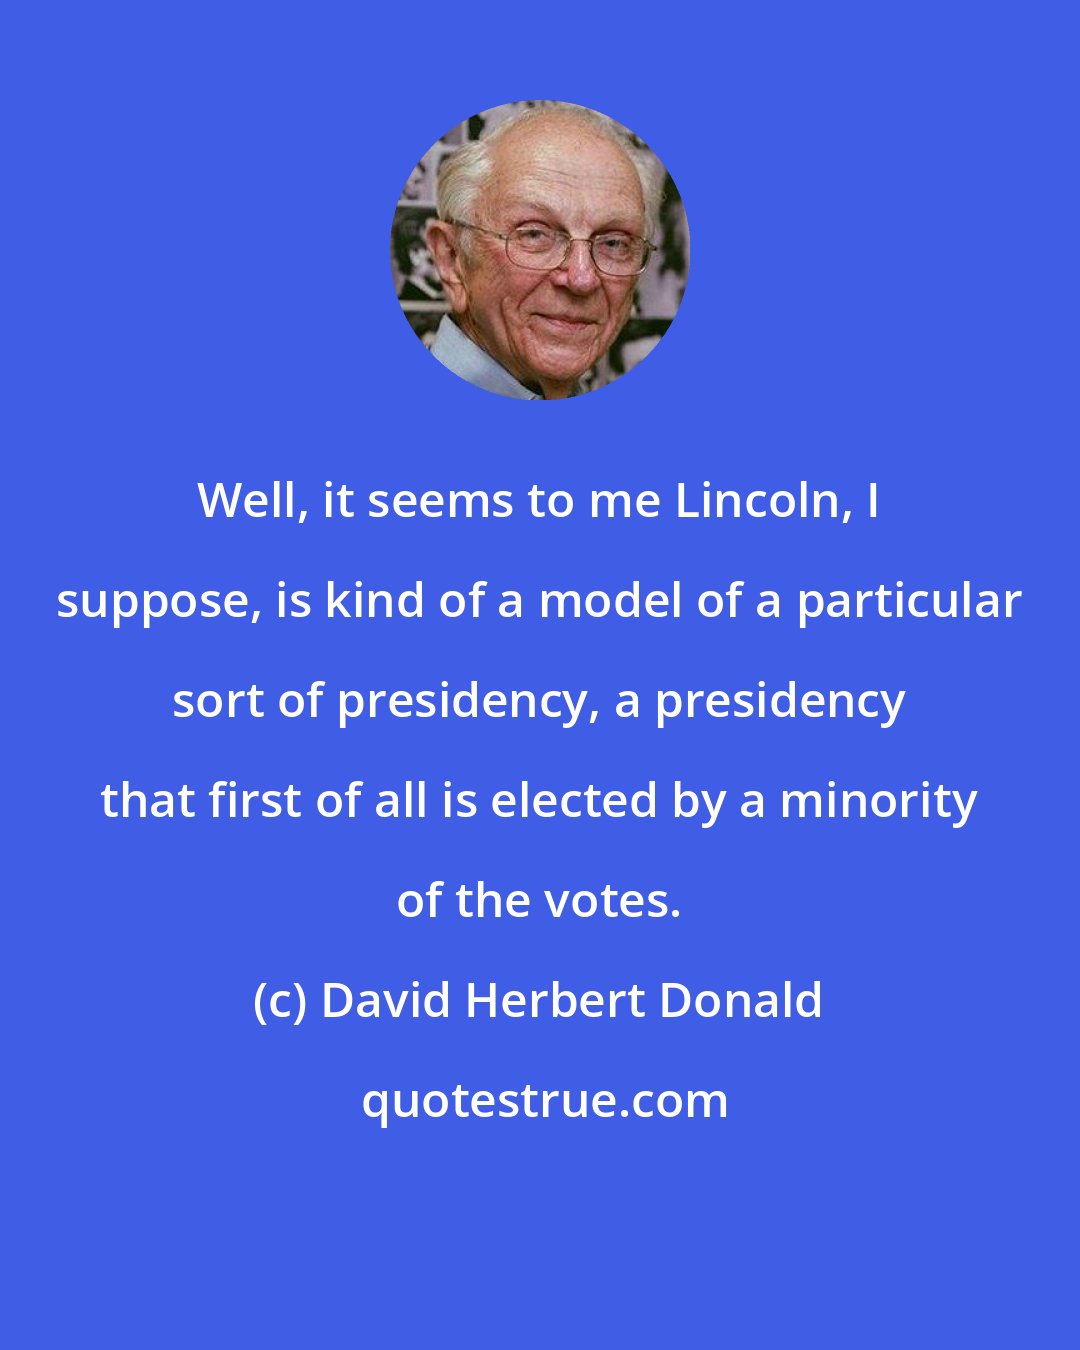 David Herbert Donald: Well, it seems to me Lincoln, I suppose, is kind of a model of a particular sort of presidency, a presidency that first of all is elected by a minority of the votes.